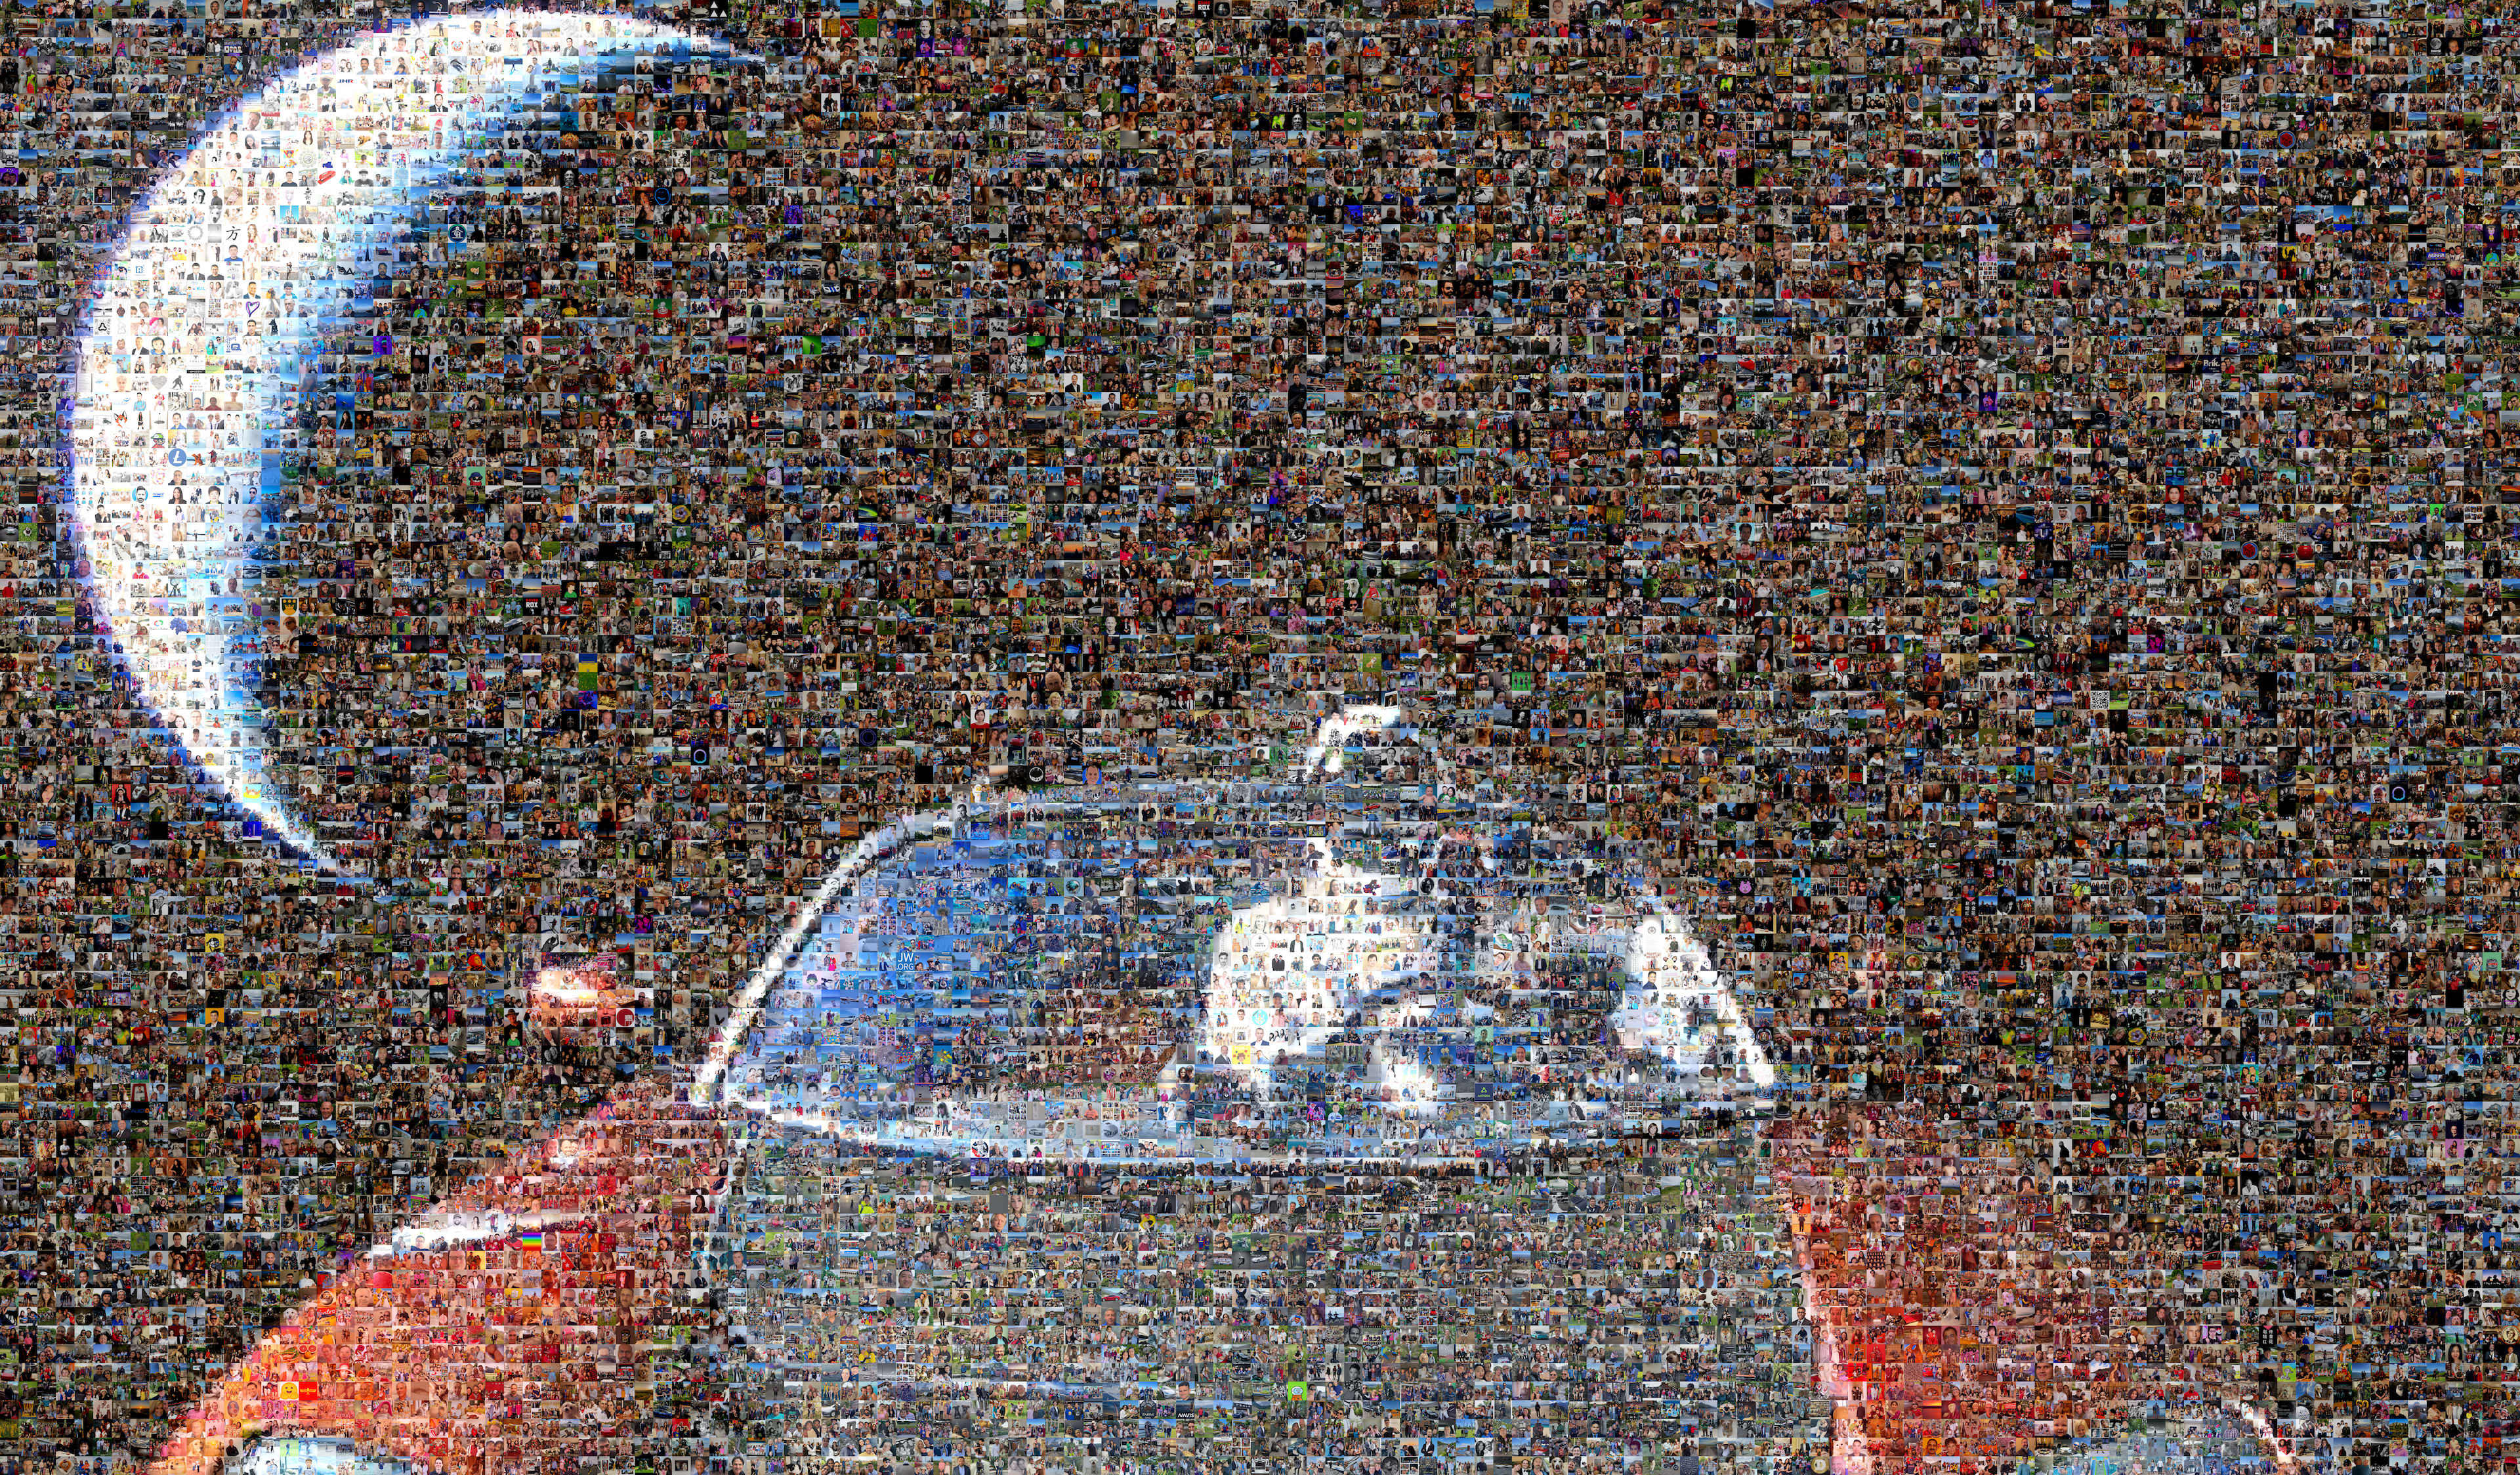 Photo in Space mosaic